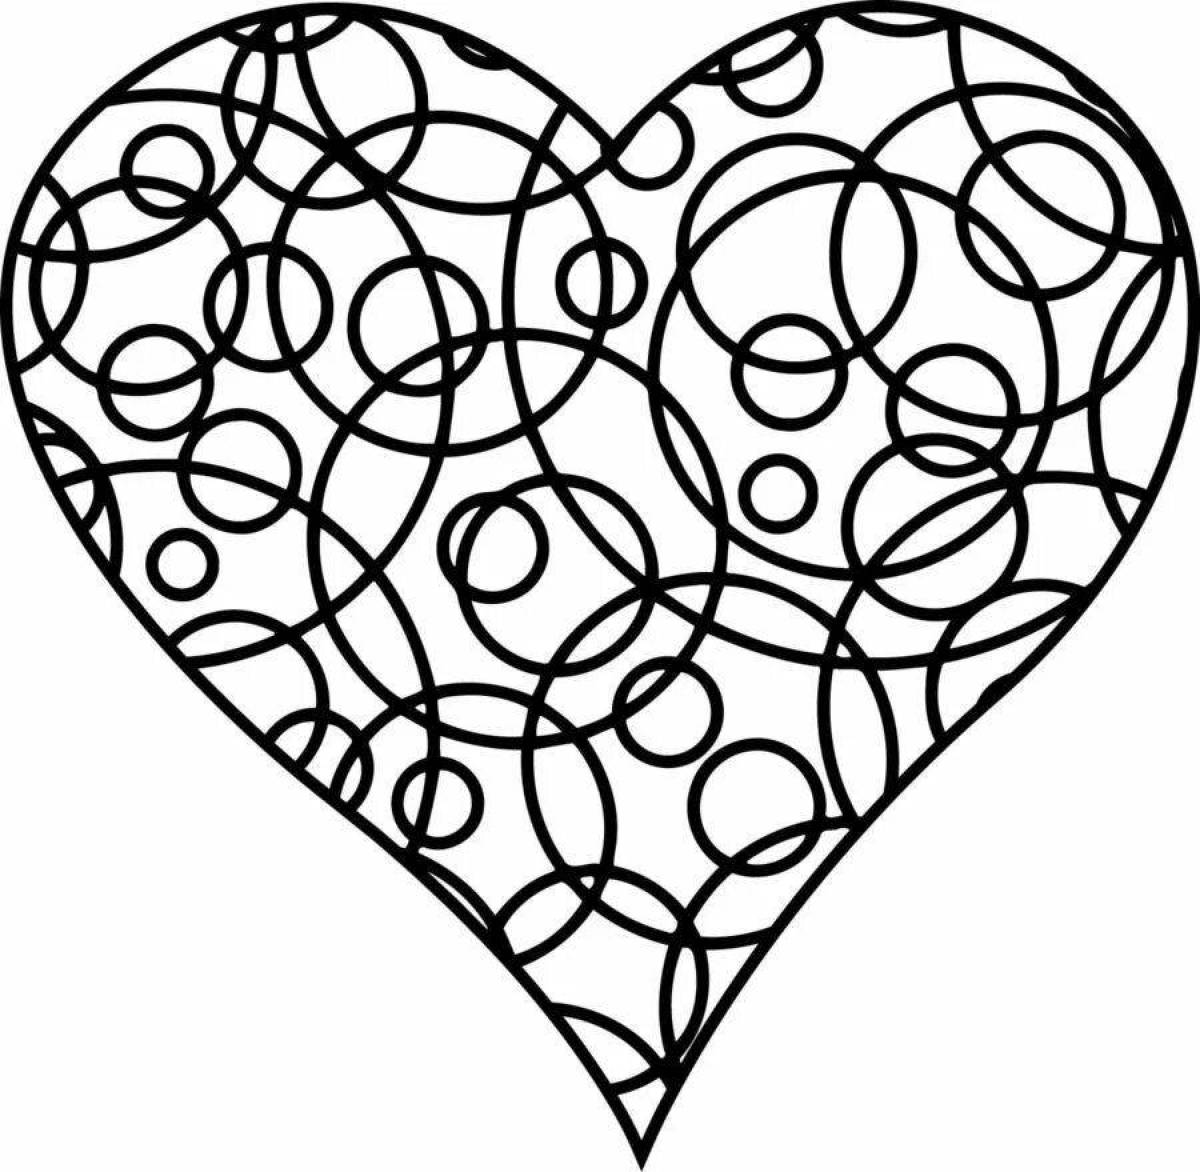 Playful heart coloring page for little ones